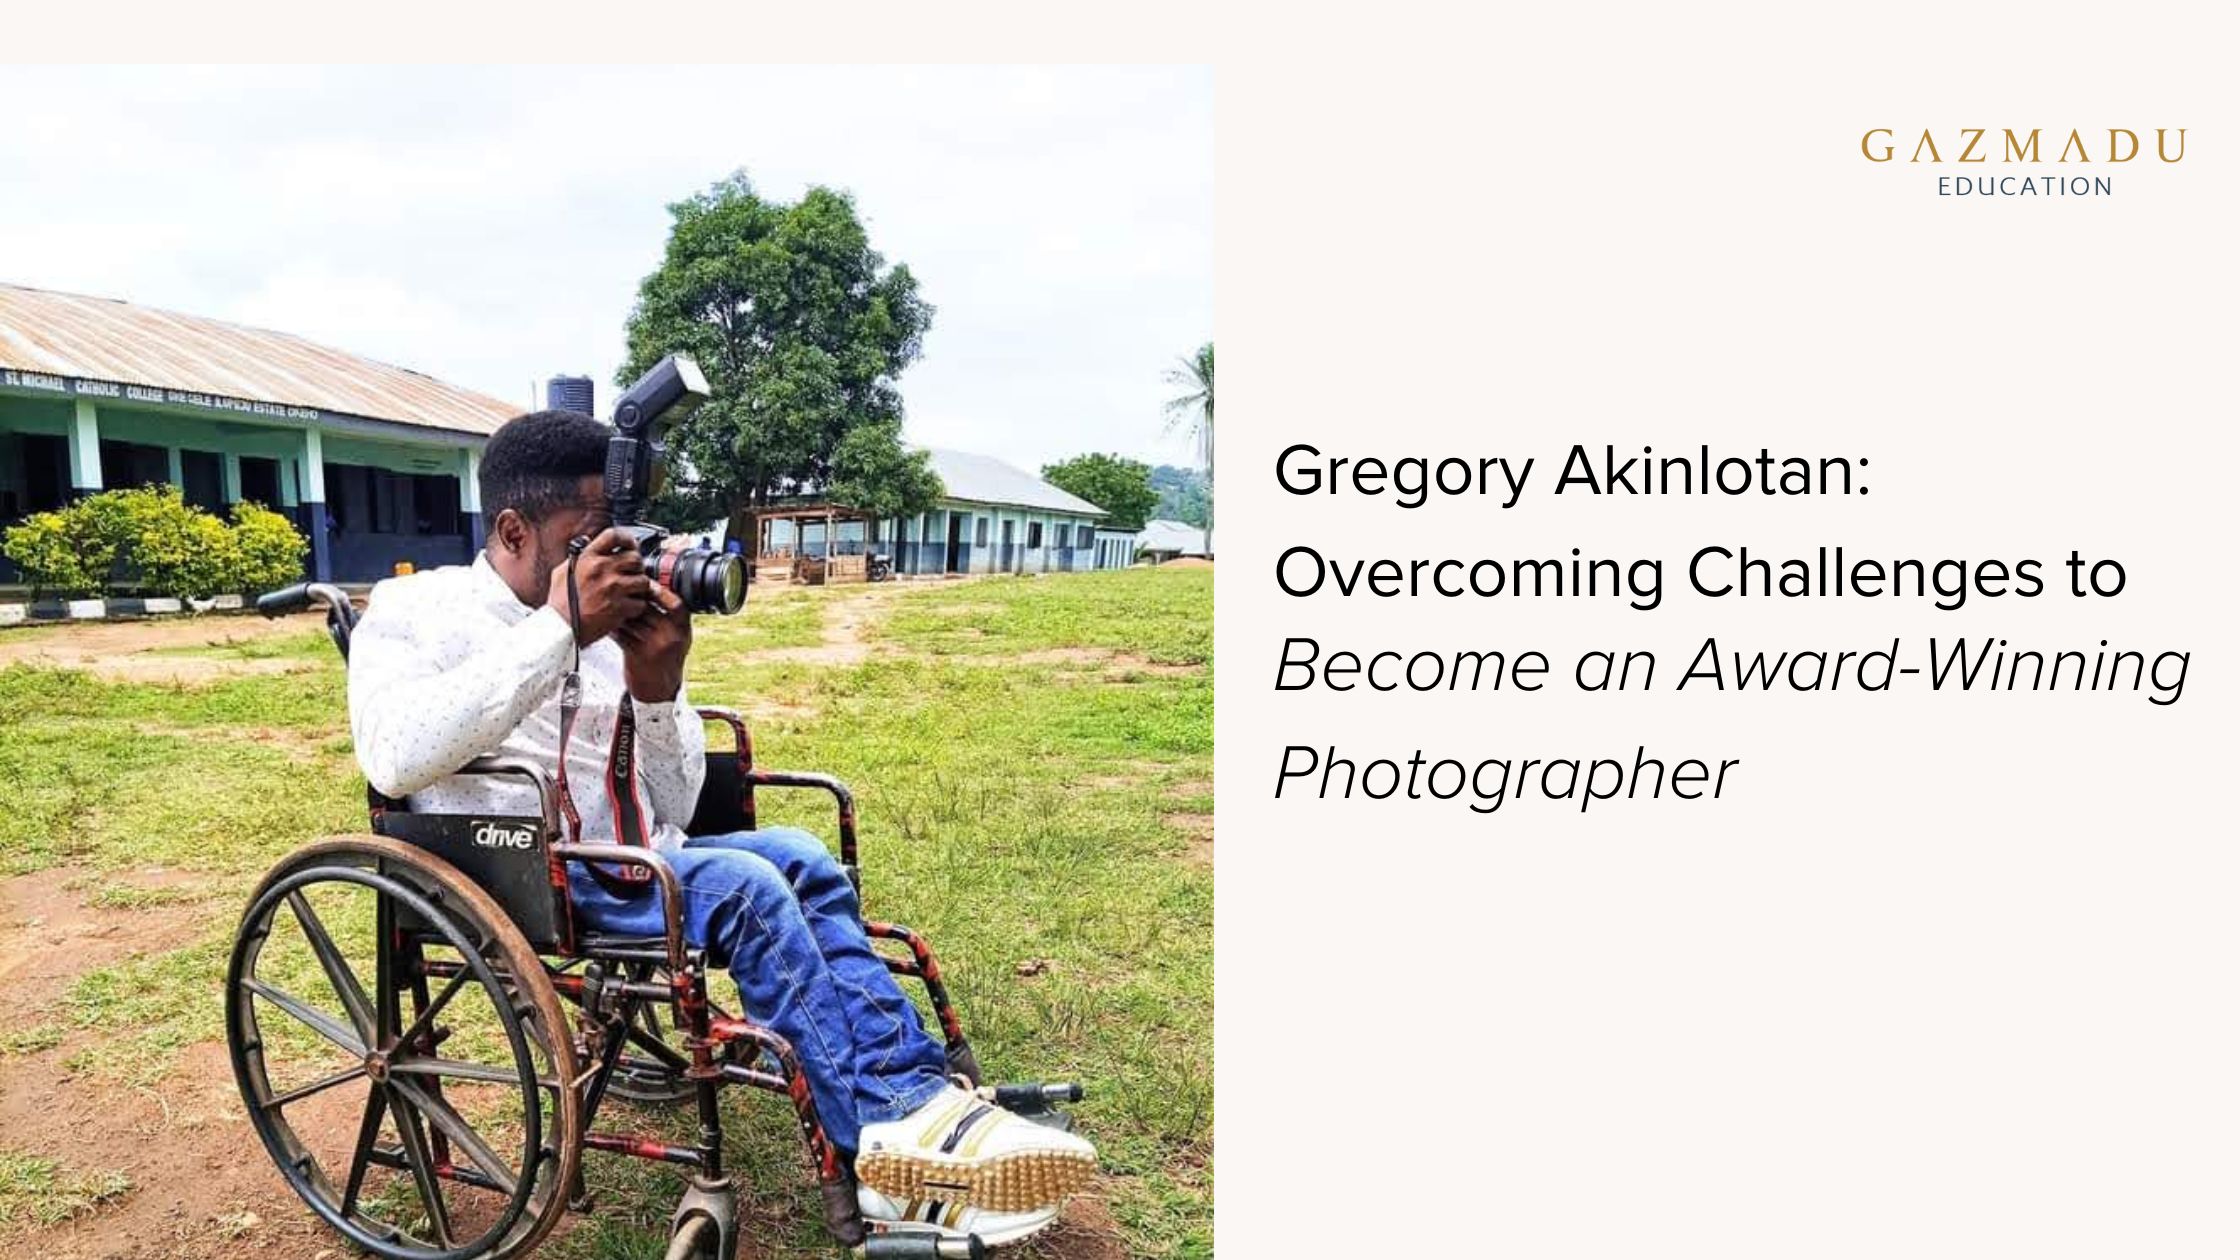 Gregory Akinlotan: Overcoming Challenges to Become an Award-Winning Photographer